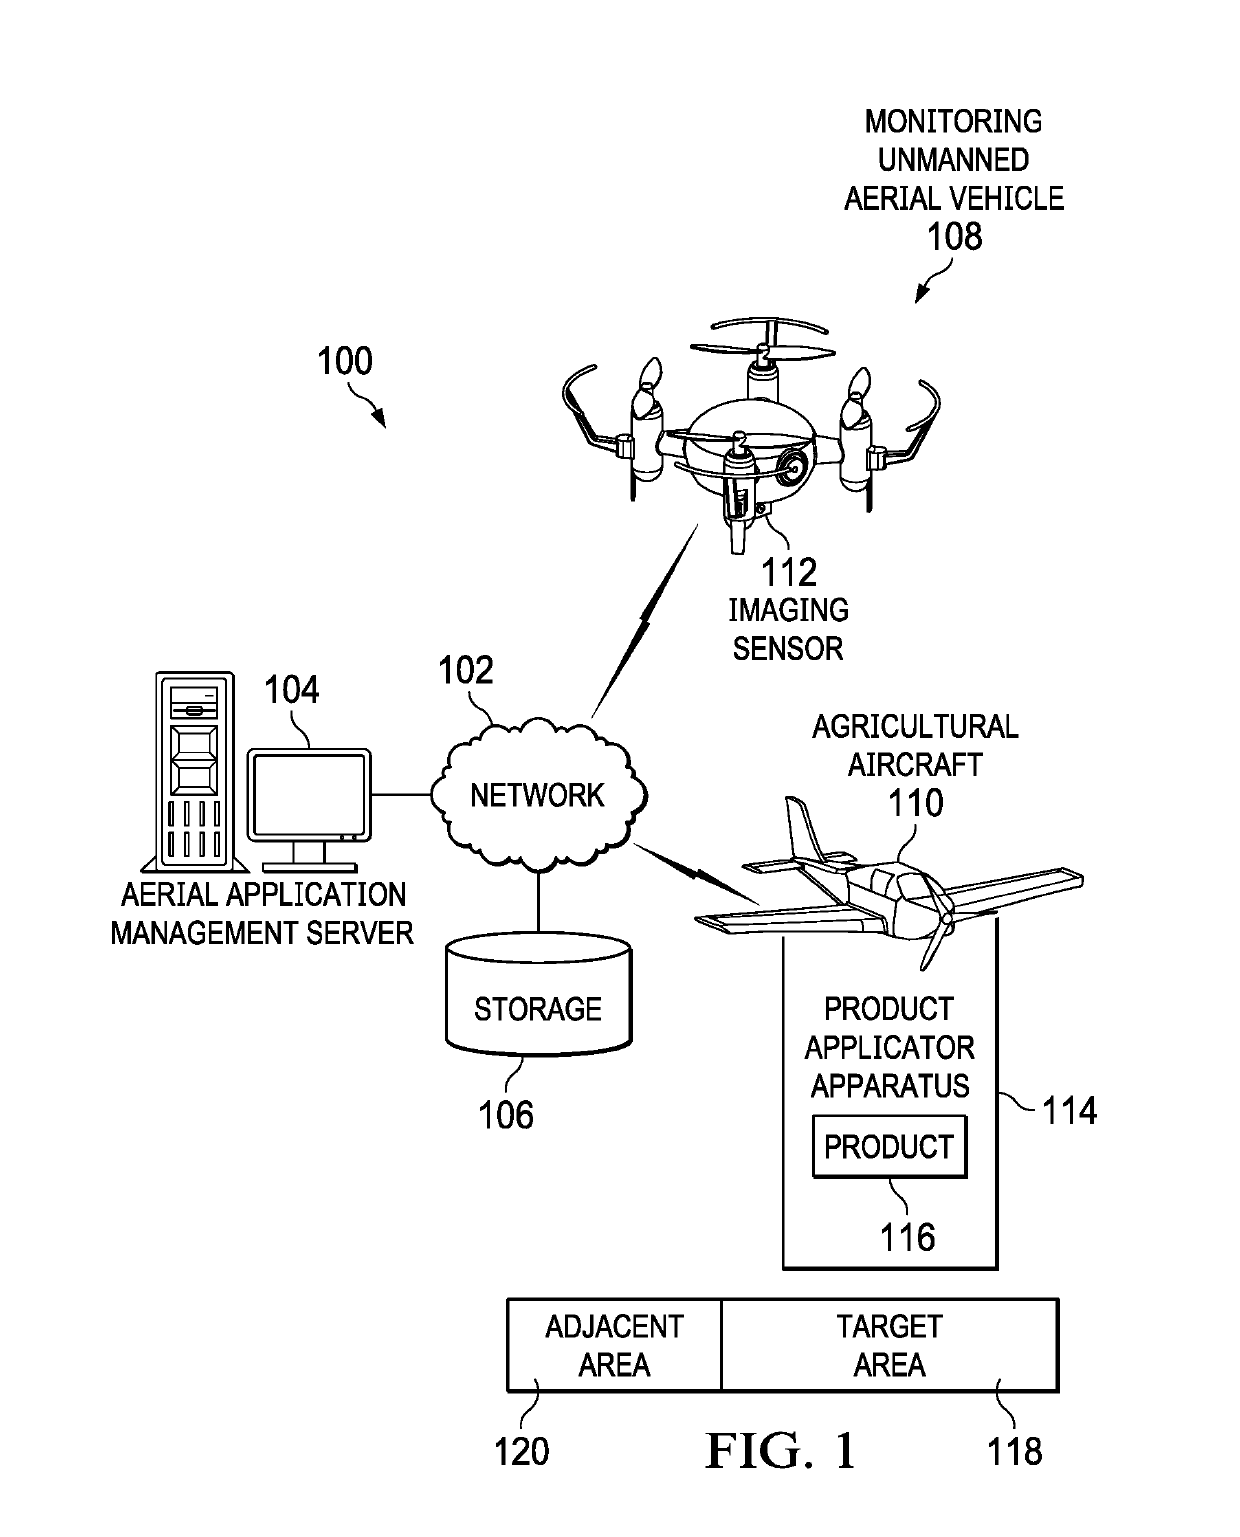 Monitoring Aerial Application Tasks and Recommending Corrective Actions